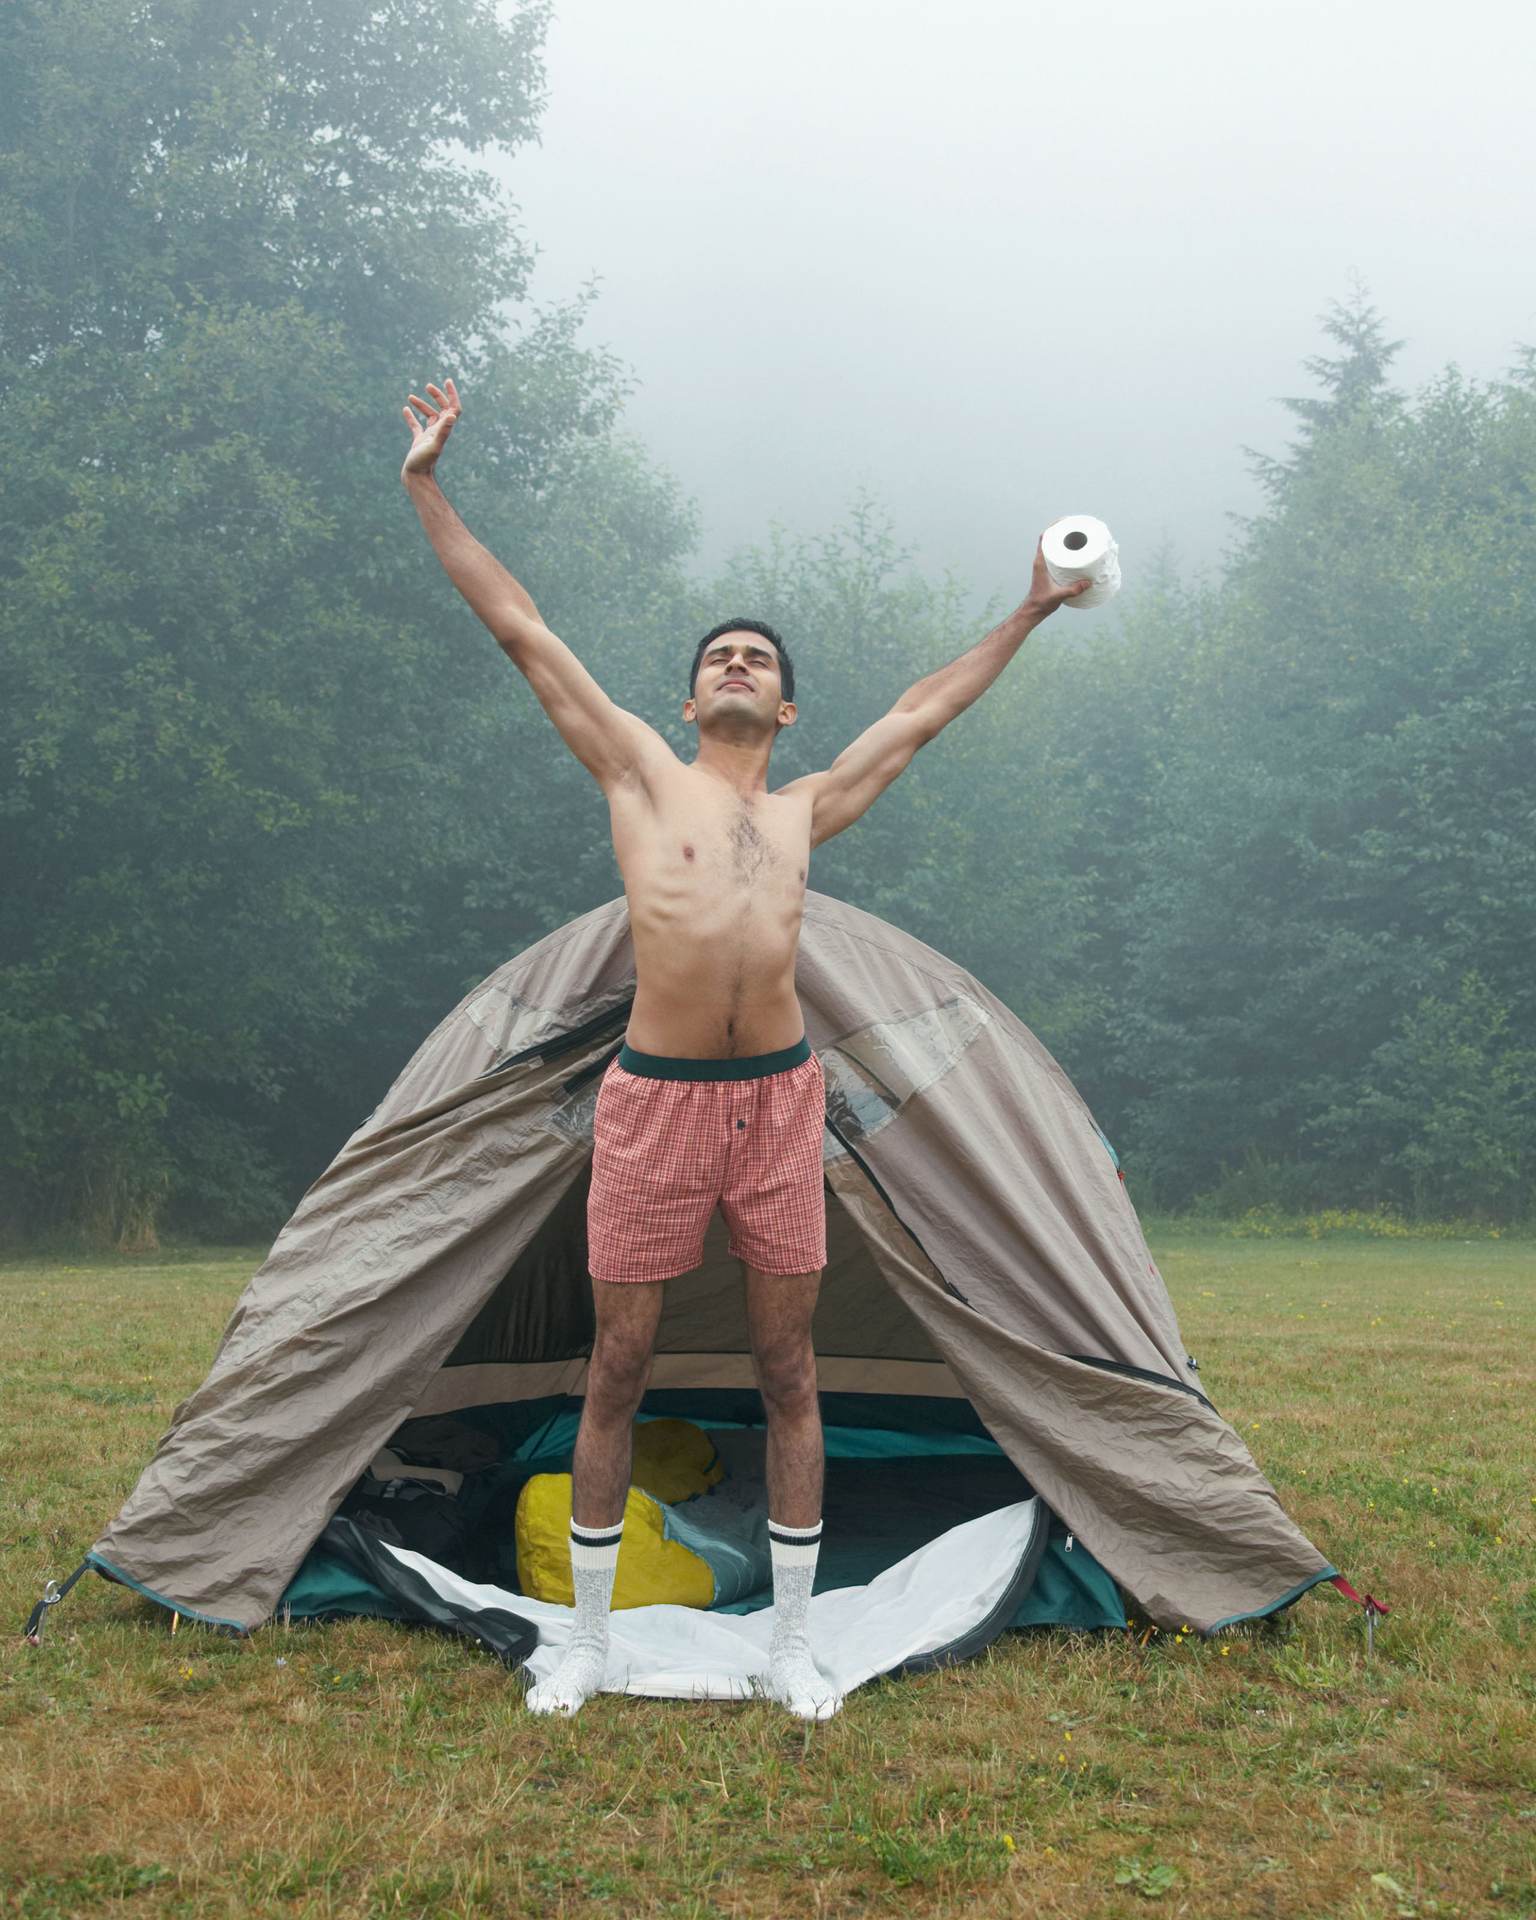 A man in swimming trunks stands in front of a tent and stretches. In his left hand he holds toilet paper.